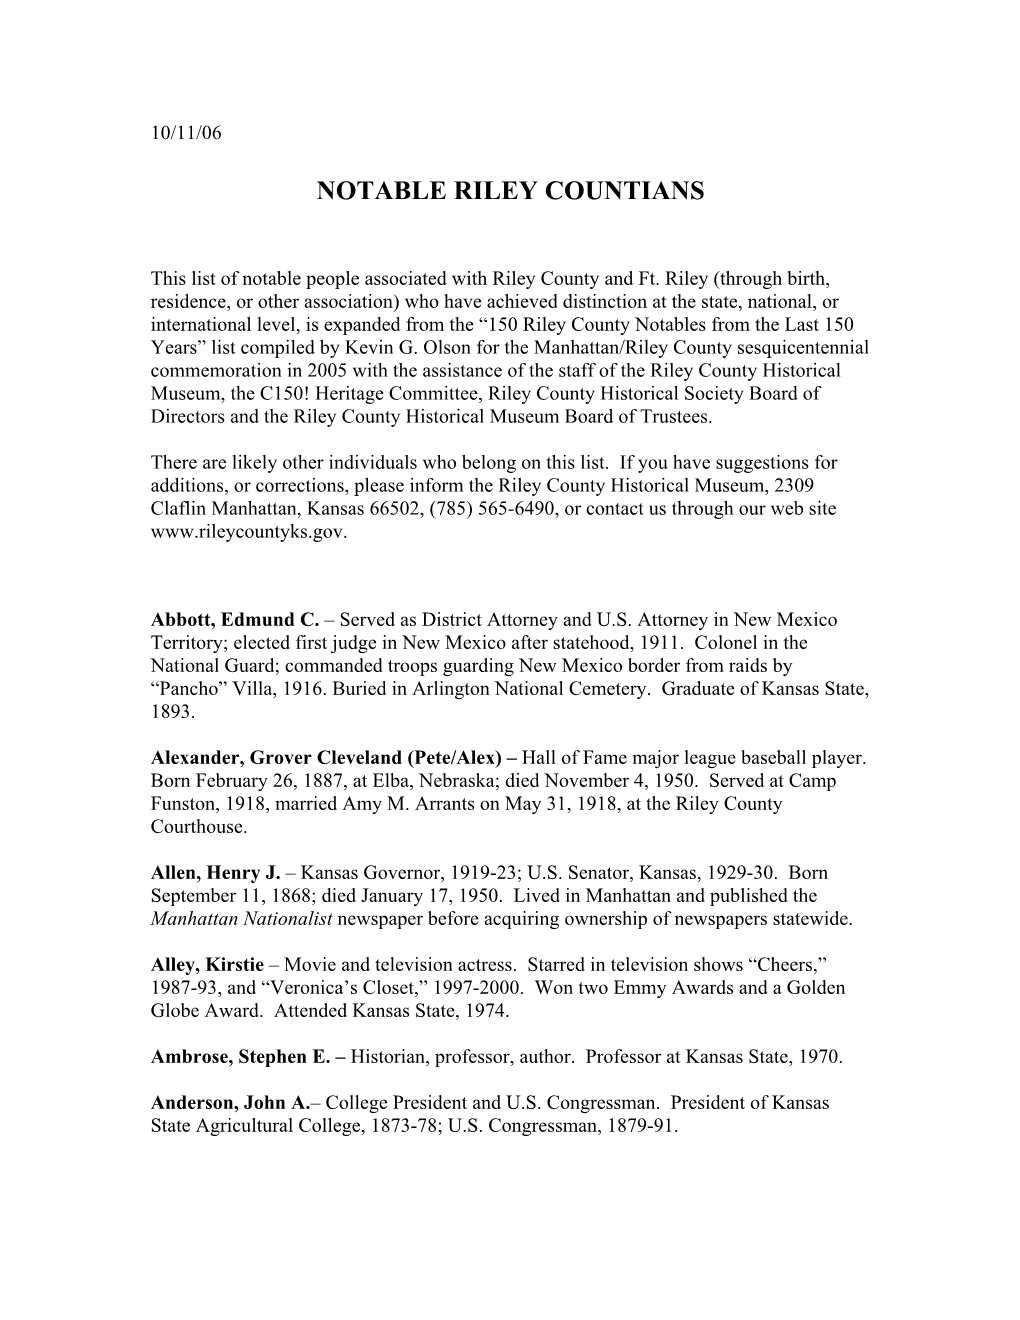 Notable Riley Countians